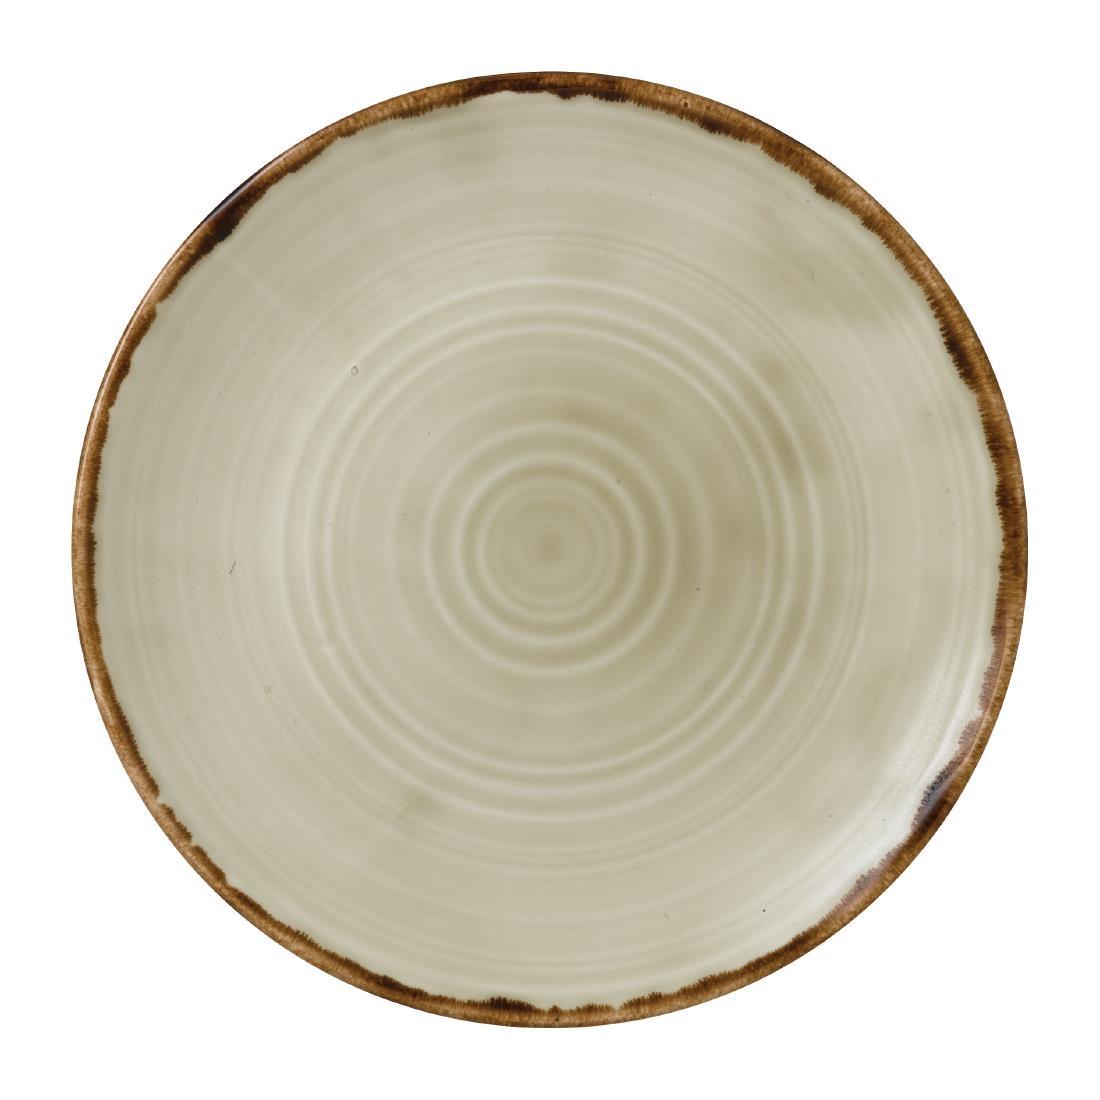 Dudson Harvest Dudson Linen Coupe Plate 230mm (Pack of 12) - FJ742  - 1